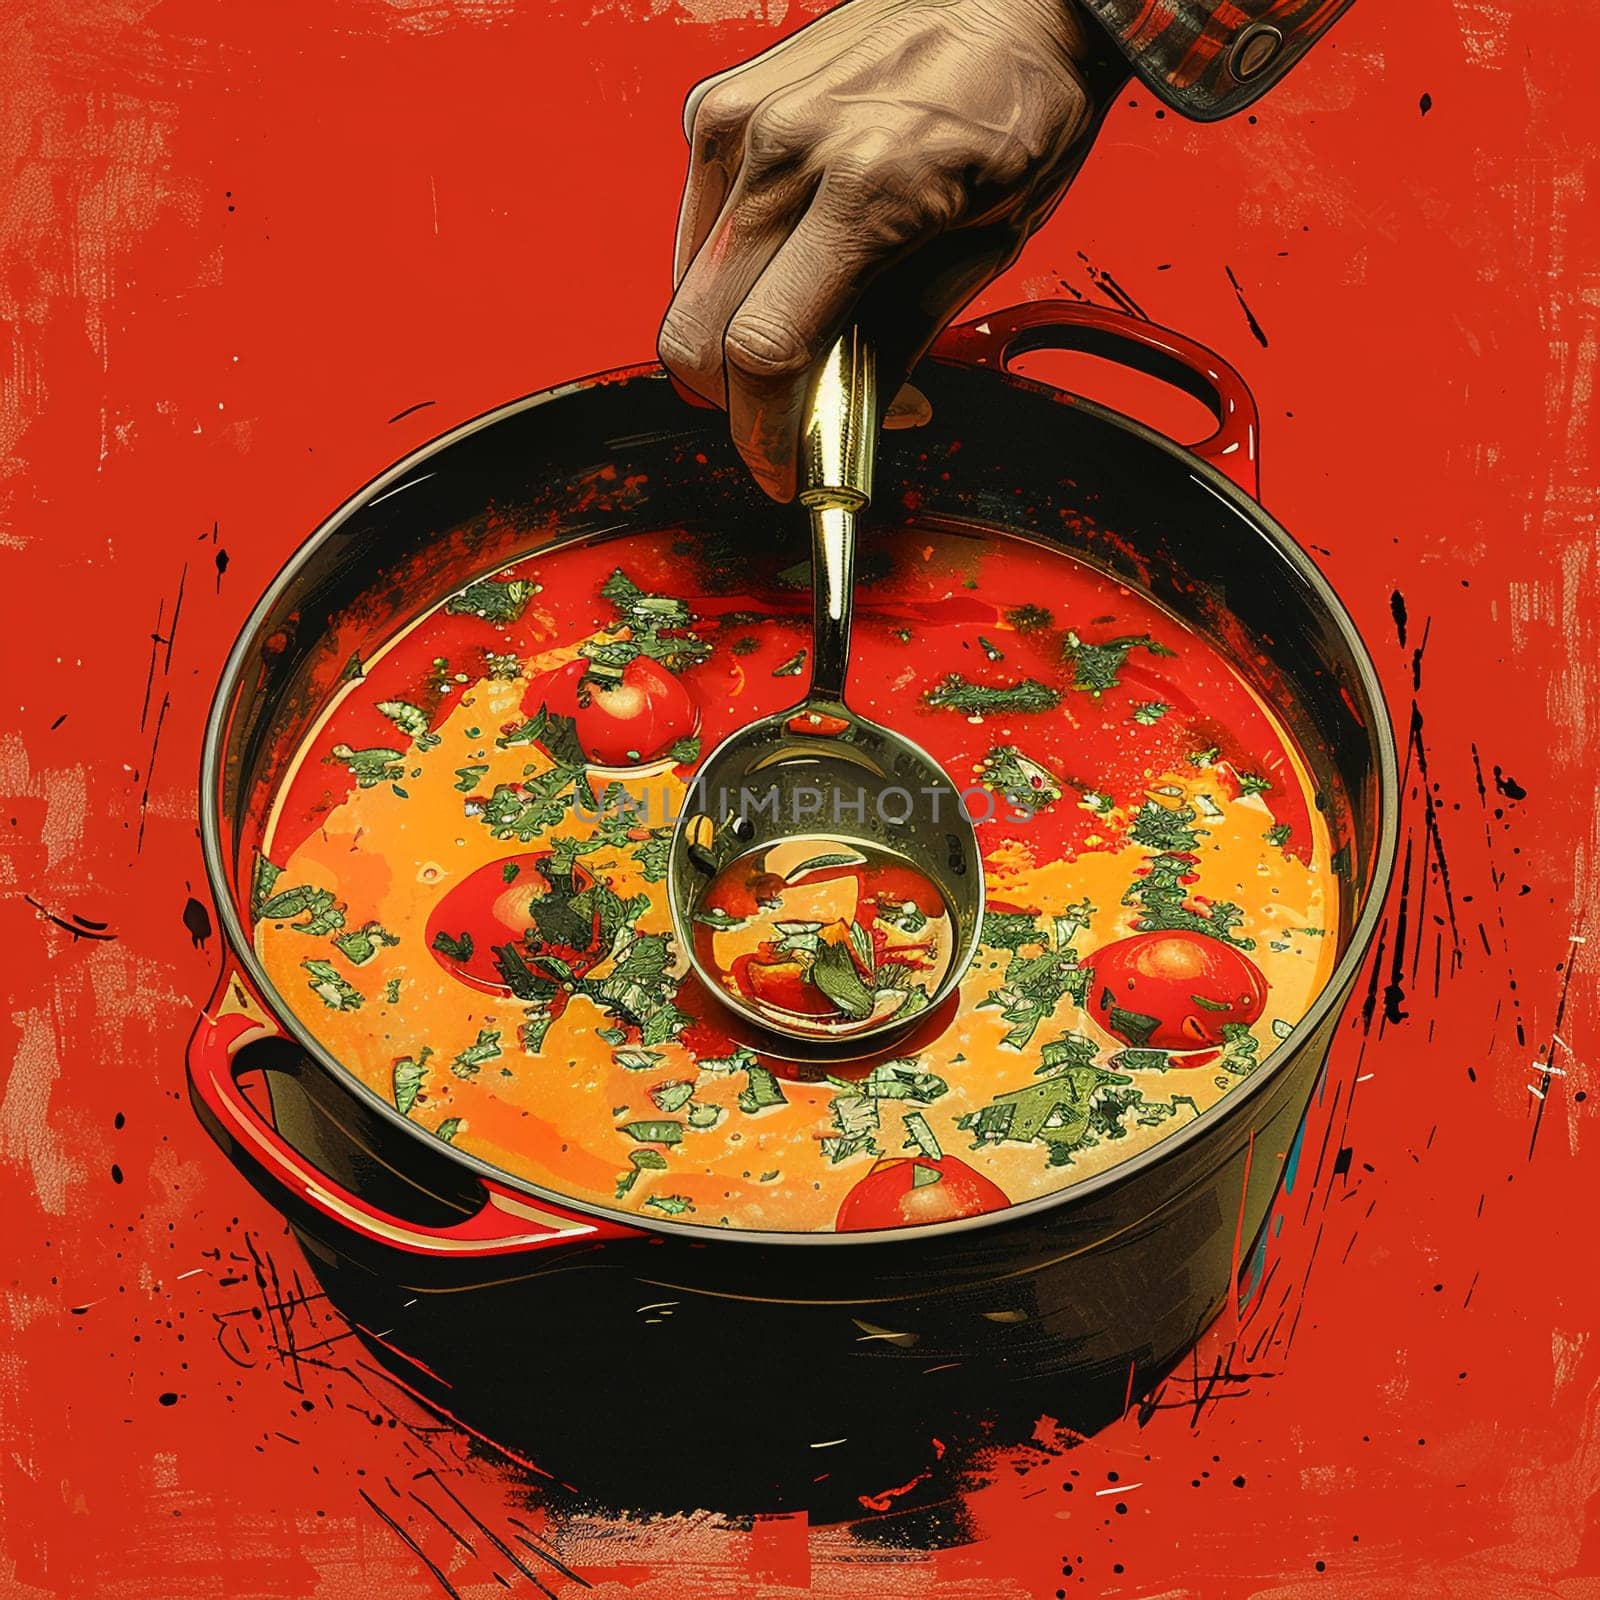 Hand stirring a pot of soup, evoking home cooking and family meals.